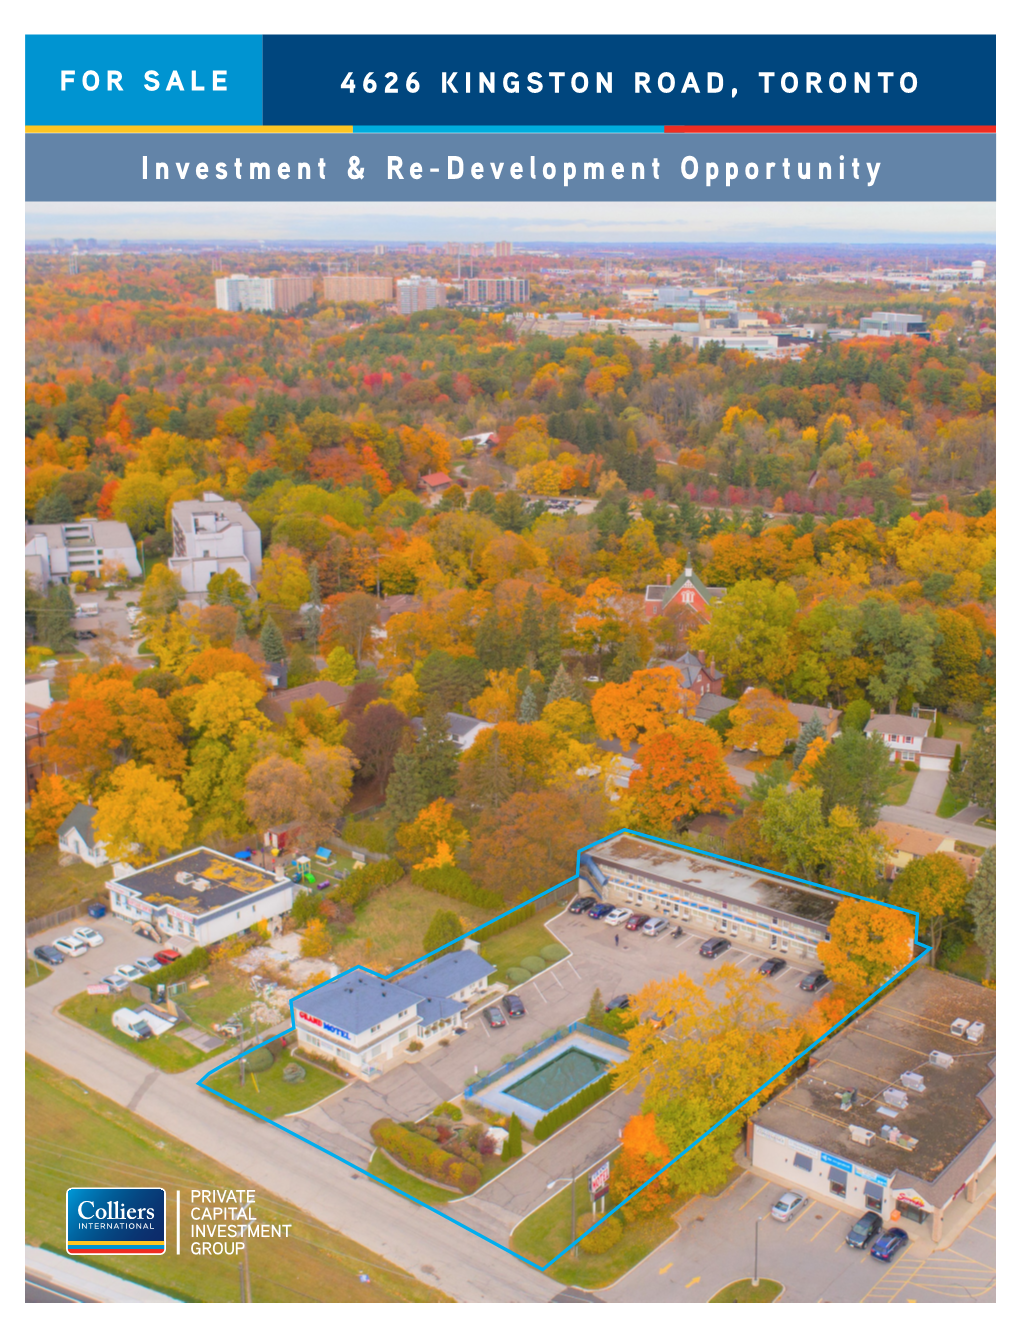 Investment & Re-Development Opportunity